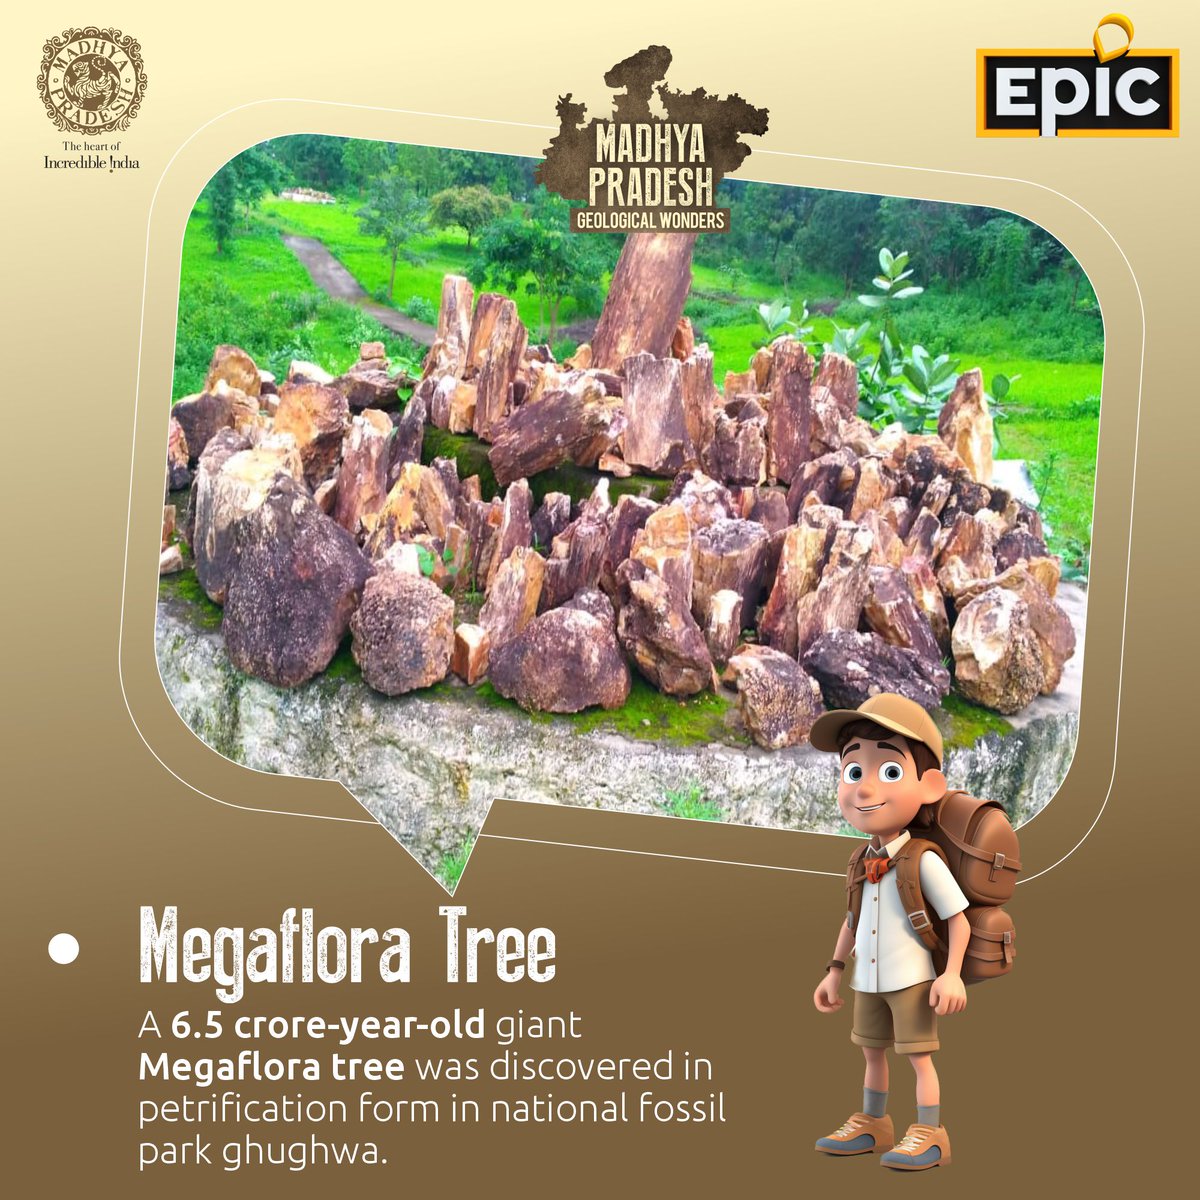 Explore Ghughua Fossils Park's enchanting Megaflora tree! 🌳🍃 Time stands still as Earth's history whispers through this captivating relic.  #MegafloraTree #GhughuaFossilsPark #MPGeologicalWonders #EPICChannel #TravelWithPurpose #DiscoverMadhyaPradesh #ExploreNature